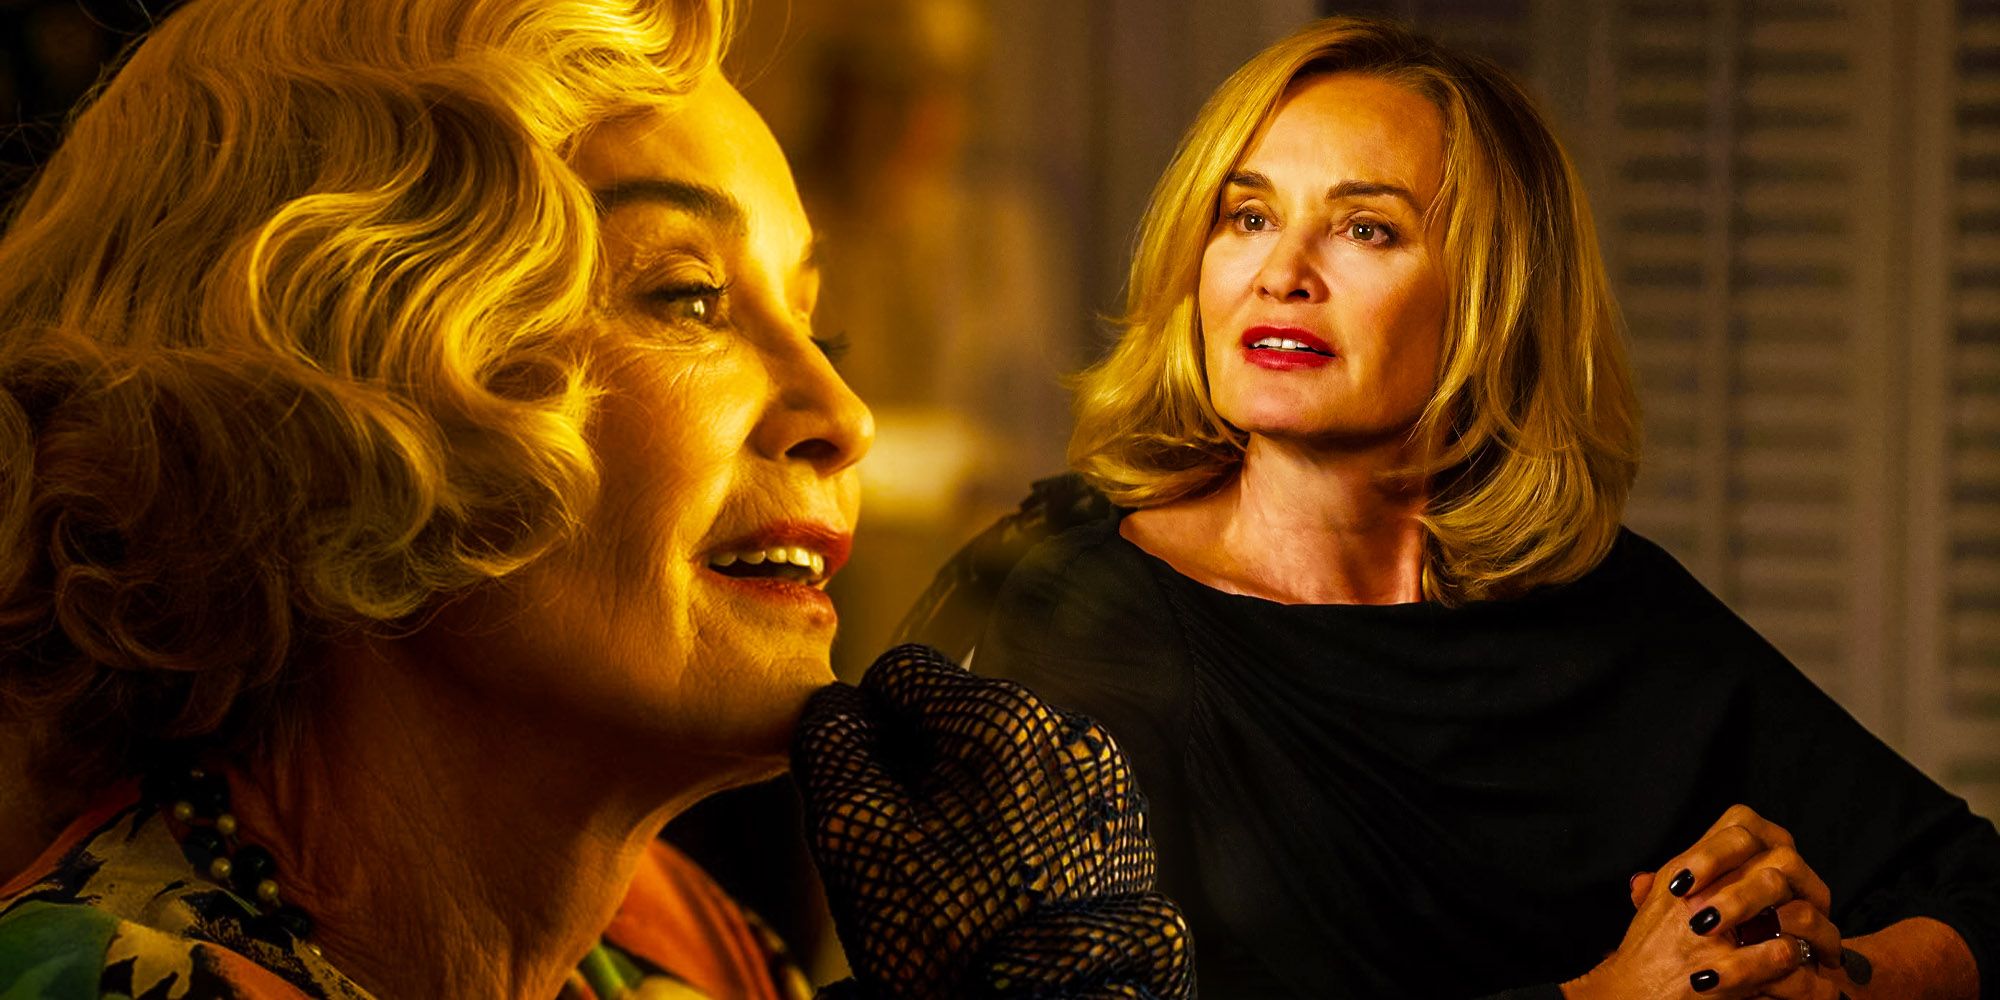 Jessica Lange’s New Film Continues Her Worst Submit-AHS Profession Pattern